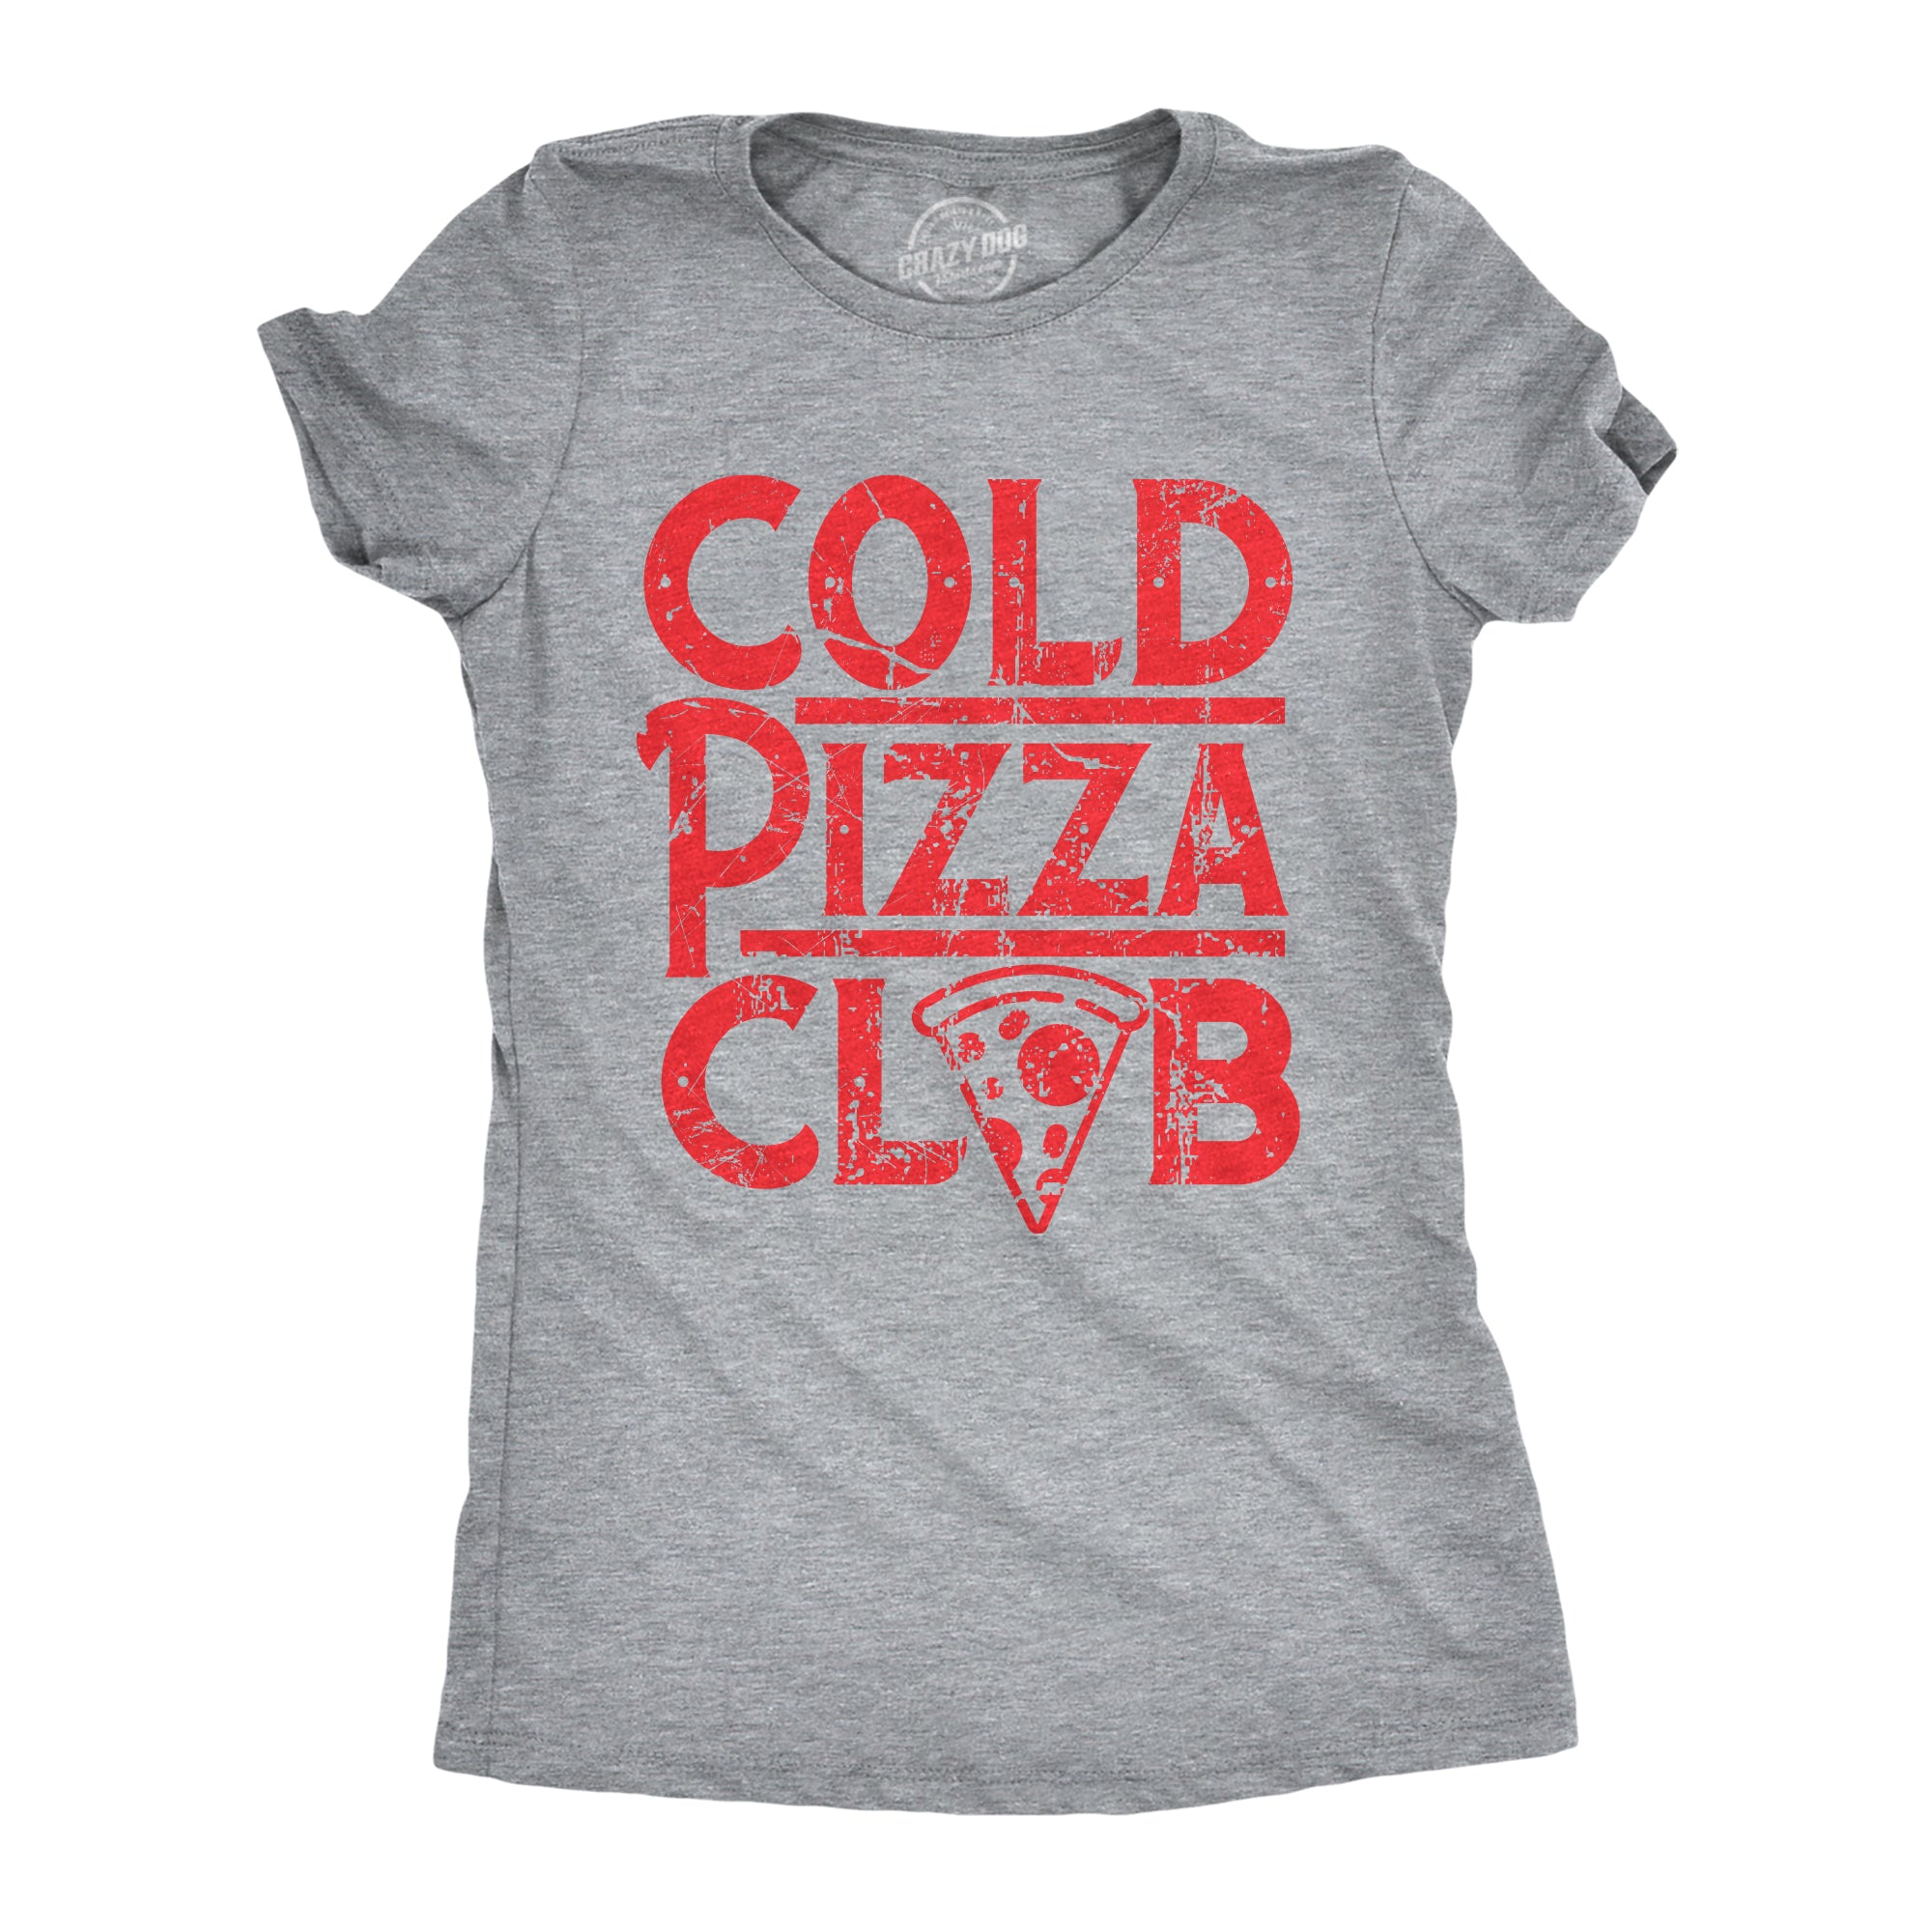 Funny Light Heather Grey - PIZZA Cold Pizza Club Womens T Shirt Nerdy Food sarcastic Tee